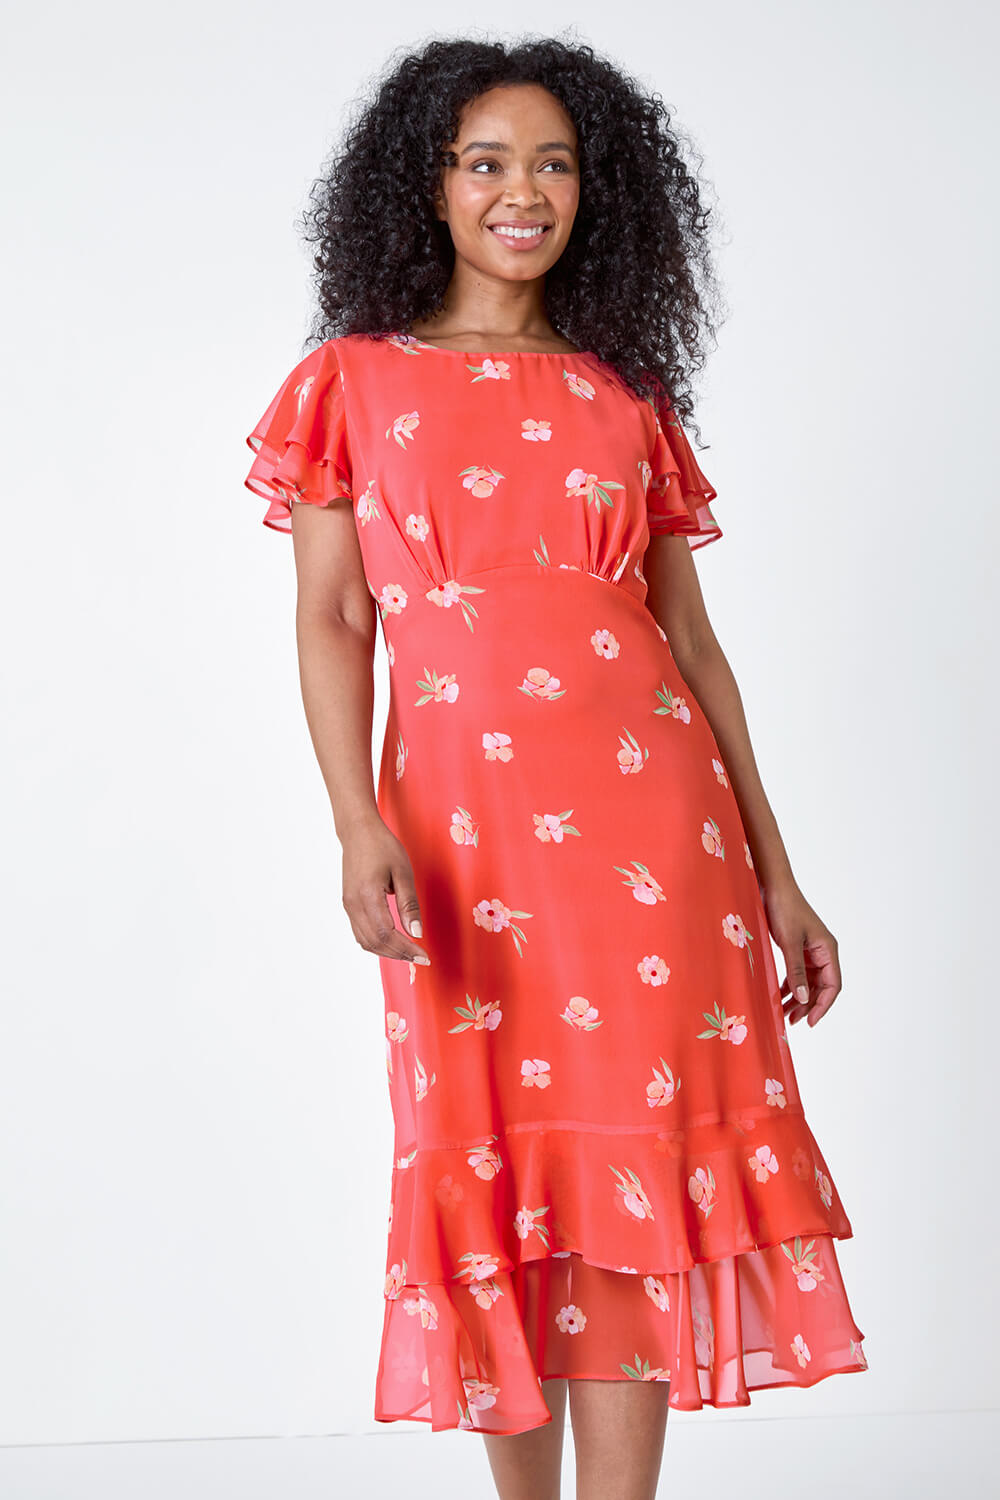 CORAL Petite Floral Chiffon Frill Tiered Midi Dress, Image 2 of 5